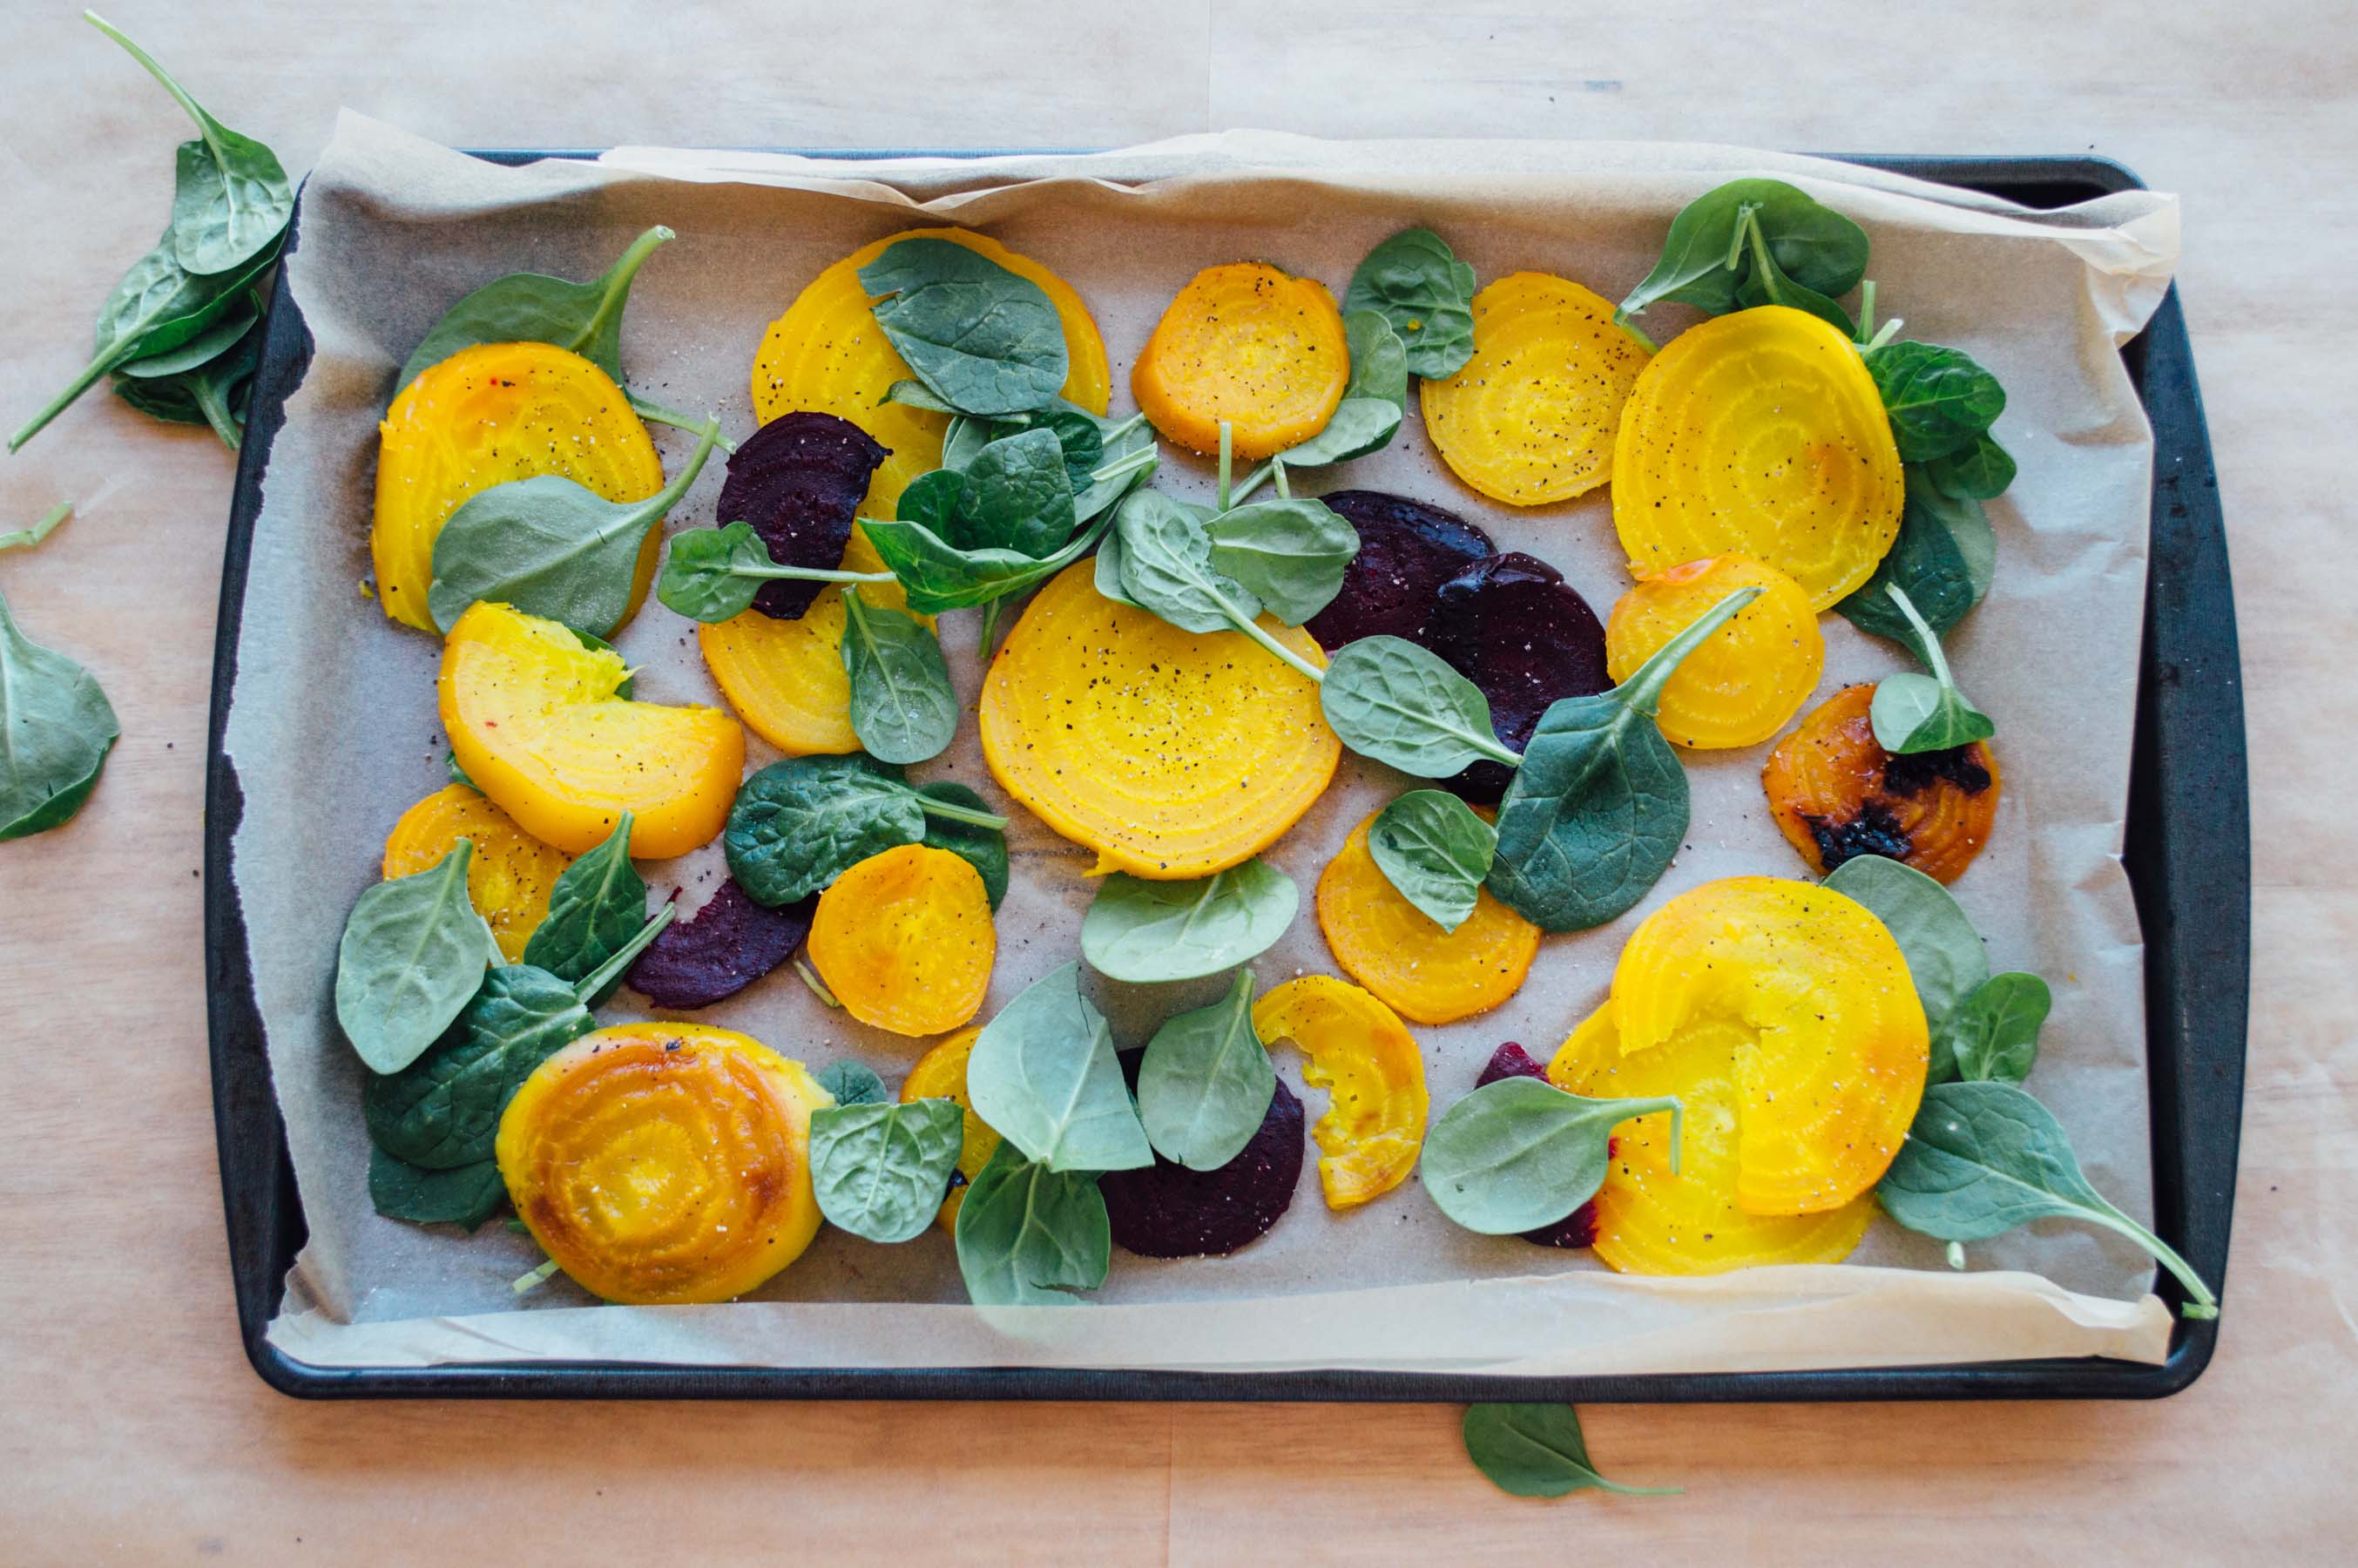 Healthy Roasted Golden Beets recipe in collaboration with the Boston Public Market | bygabriella.co